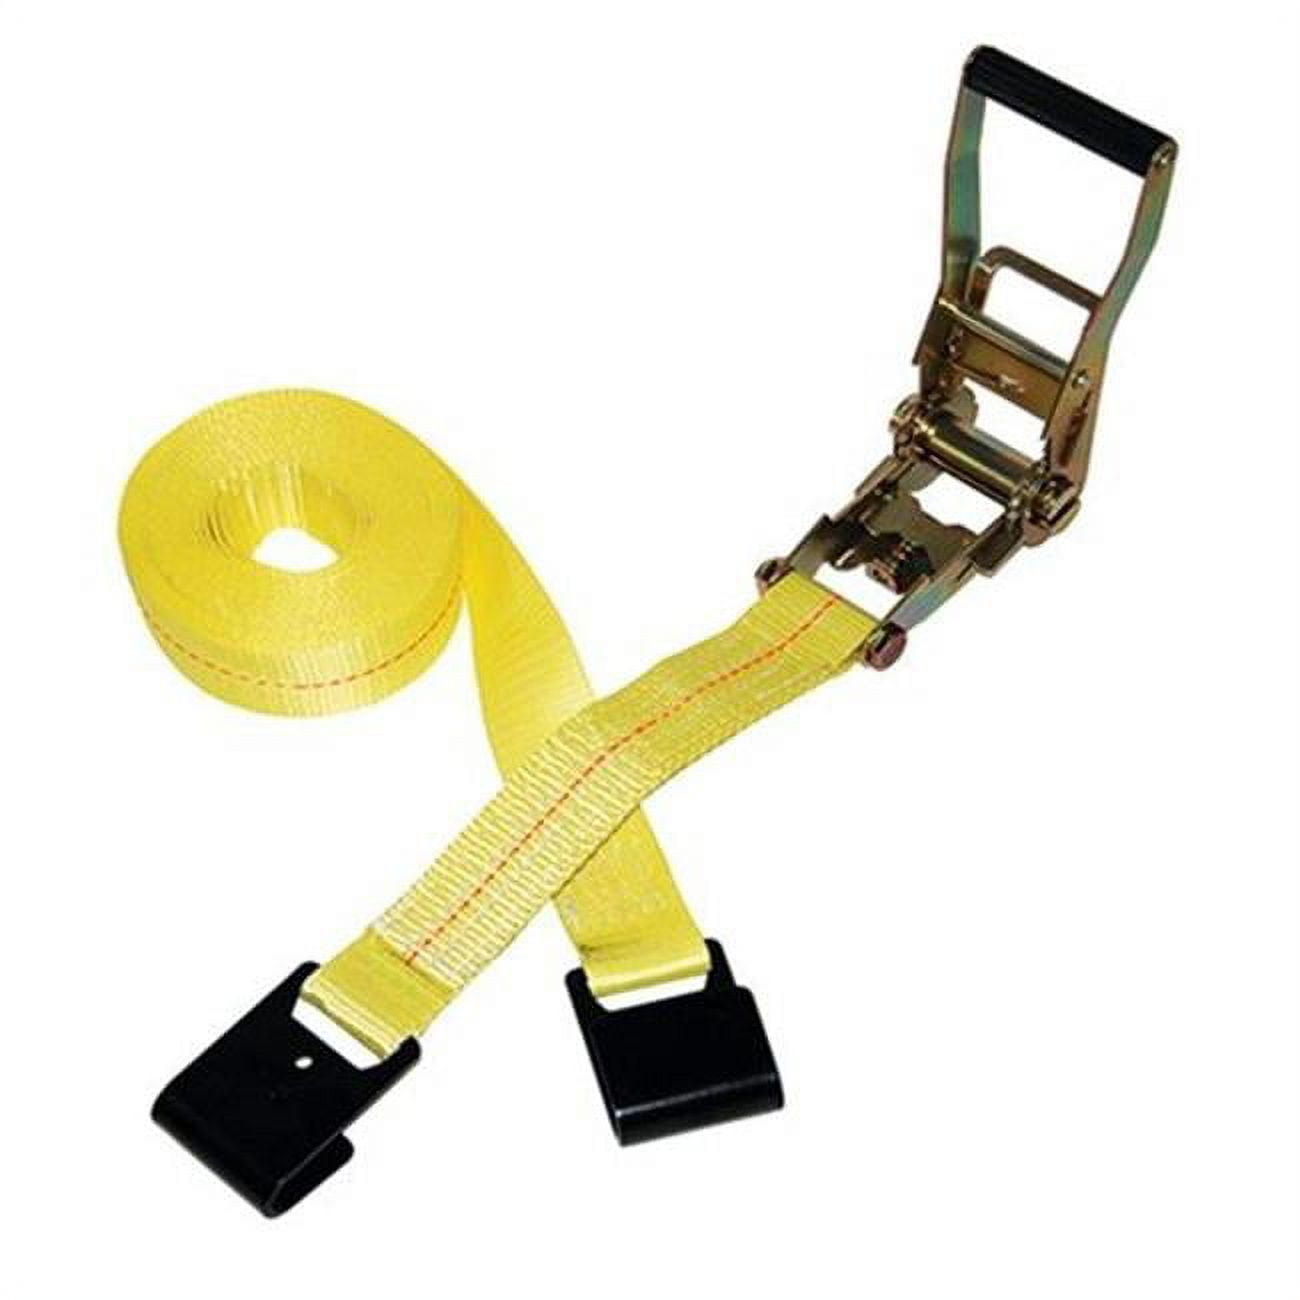 2 X 50' Ratchet Tie Down Strap with Long, Wide Handle & Flat Hooks